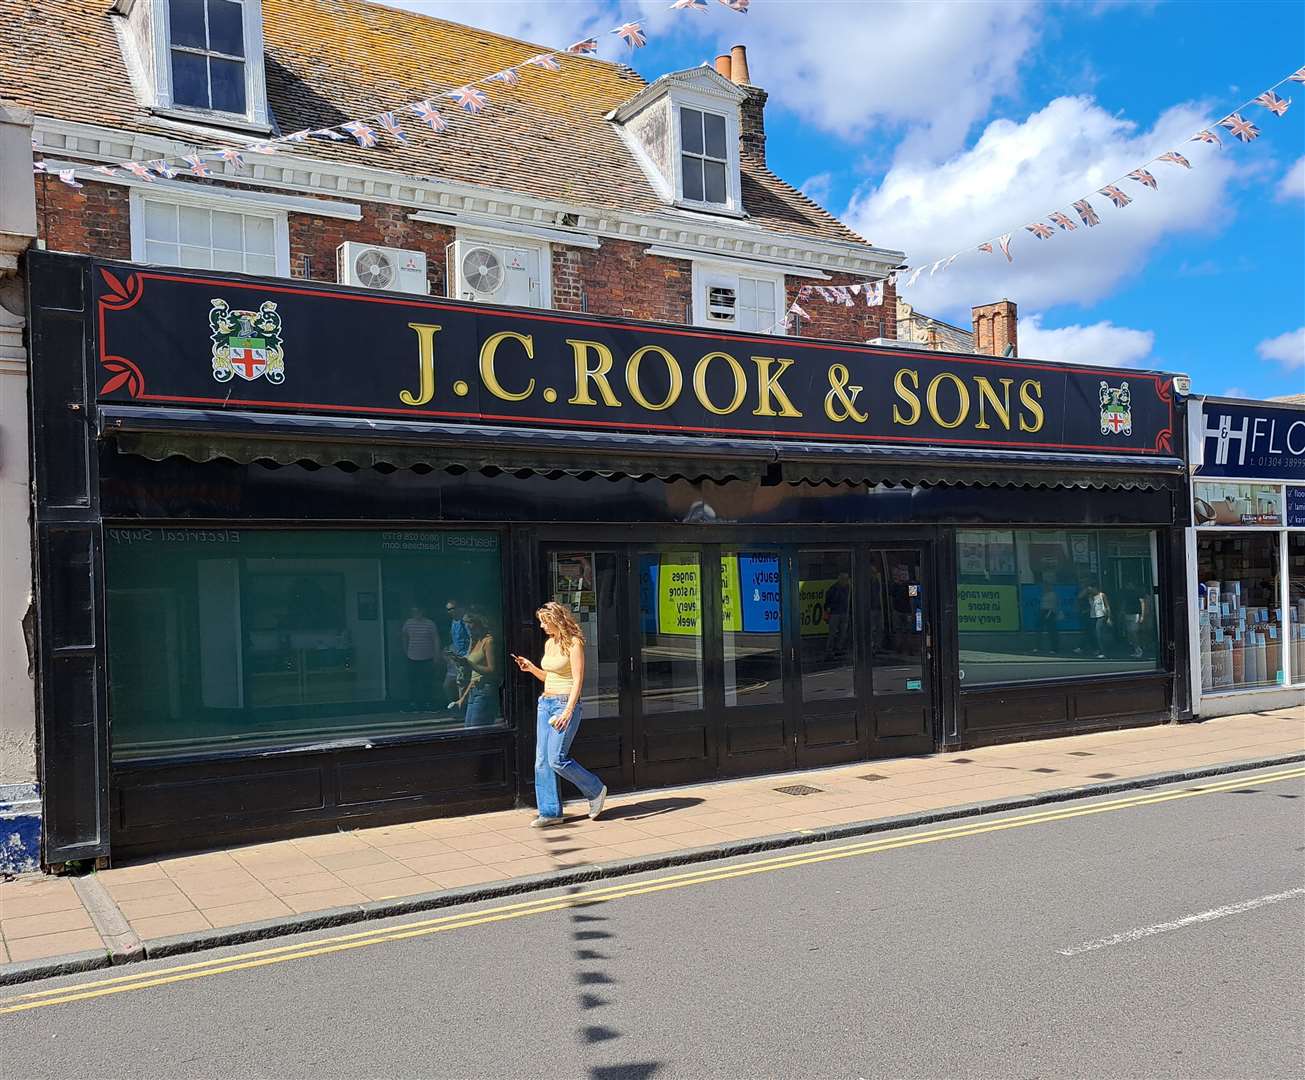 The Rooks site in Deal, which has now been taken over by a fishmongers